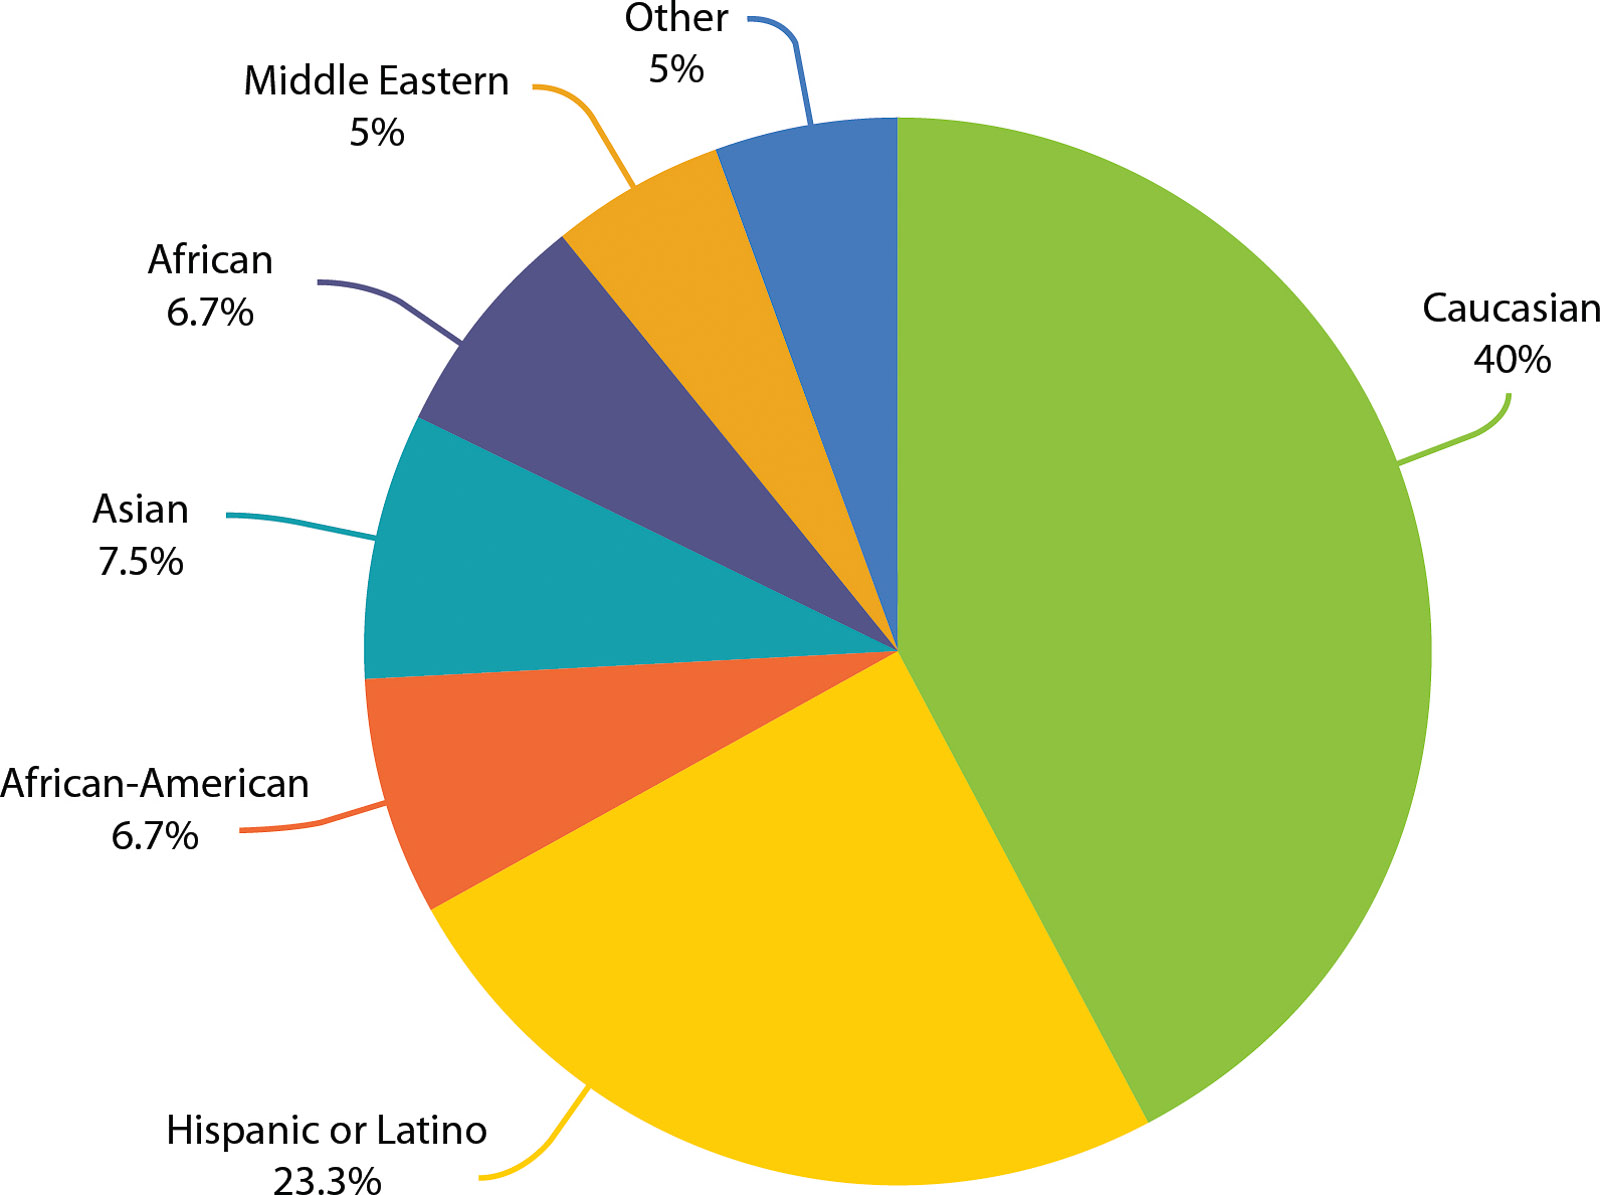 Race and ethnicity of respondents.